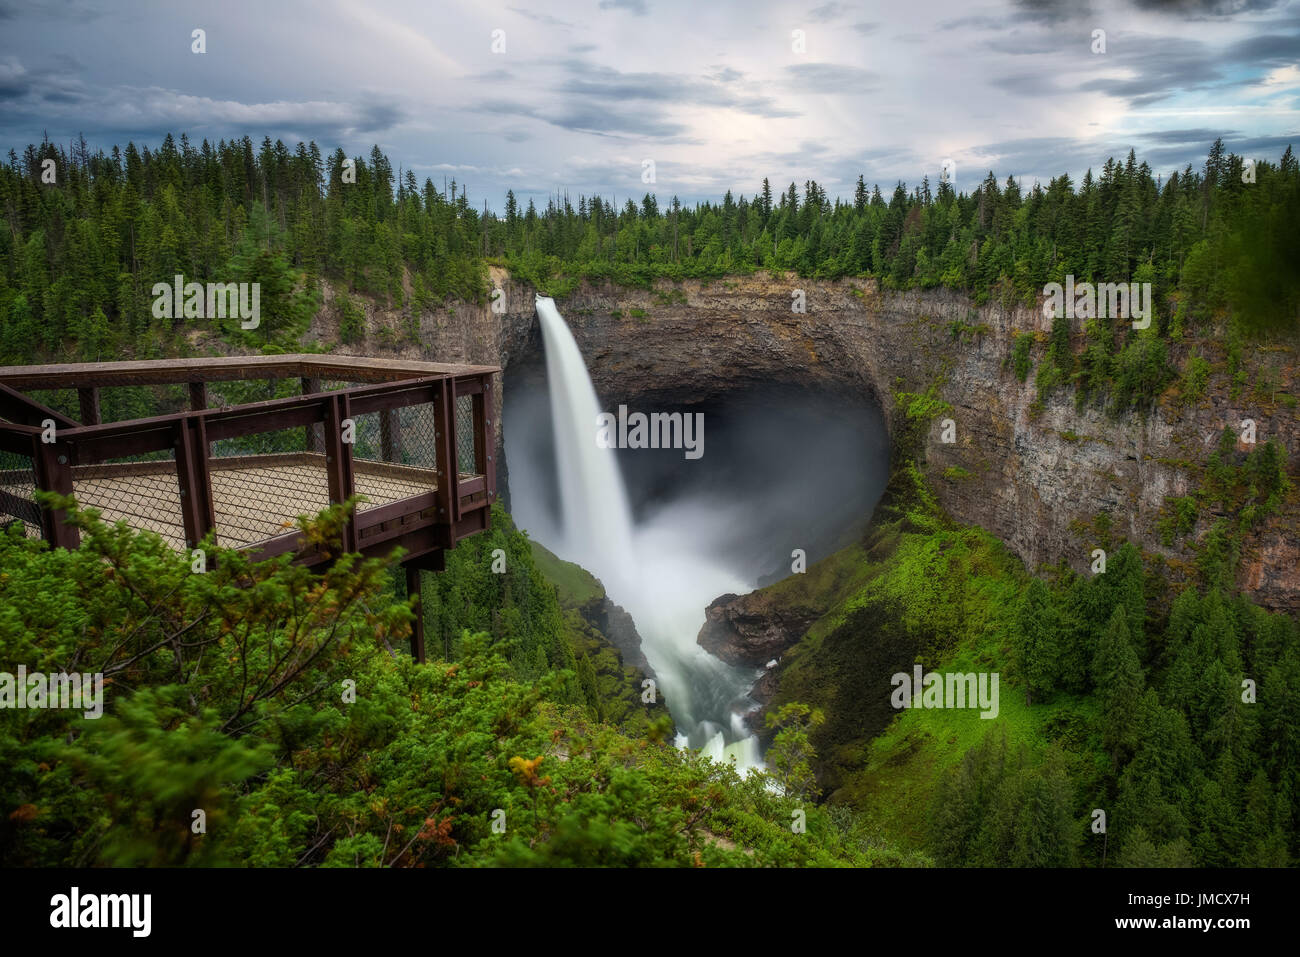 Helmcken Falls and an outlook platform in Wells Gray Provincial Park near Clearwater, British Columbia, Canada. Long exposure. Stock Photo